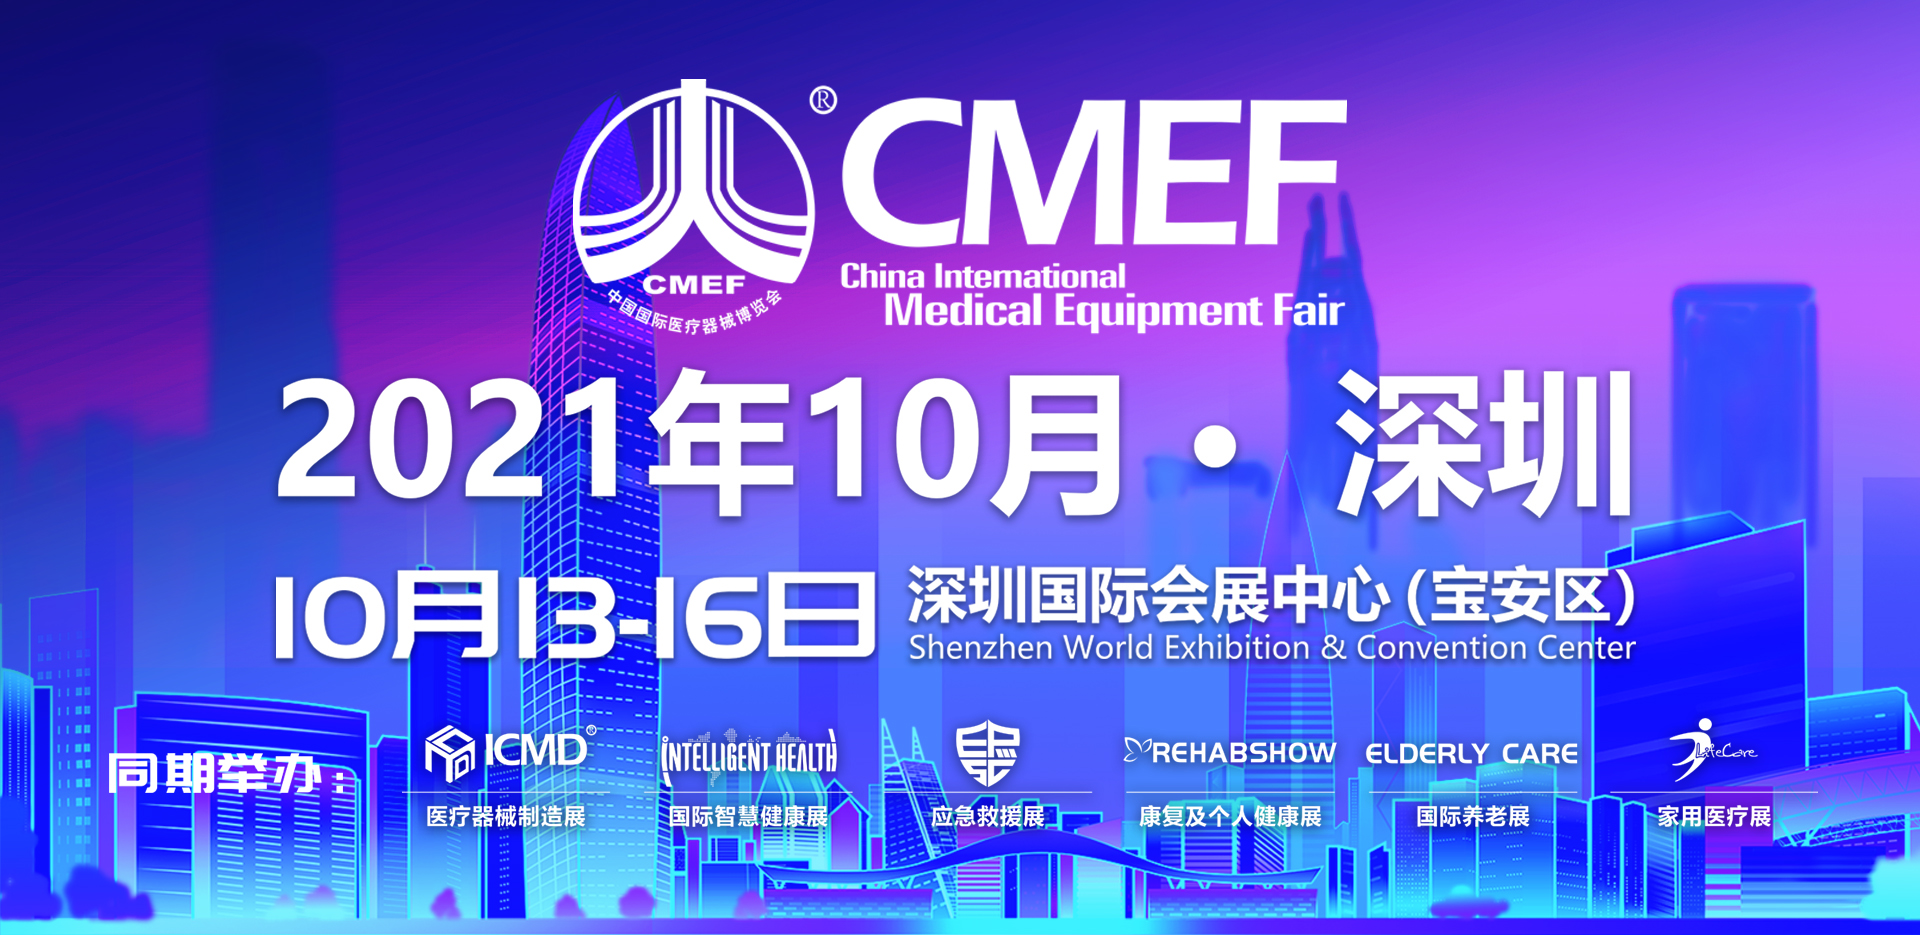 Hecin will attend the 86th CMEF